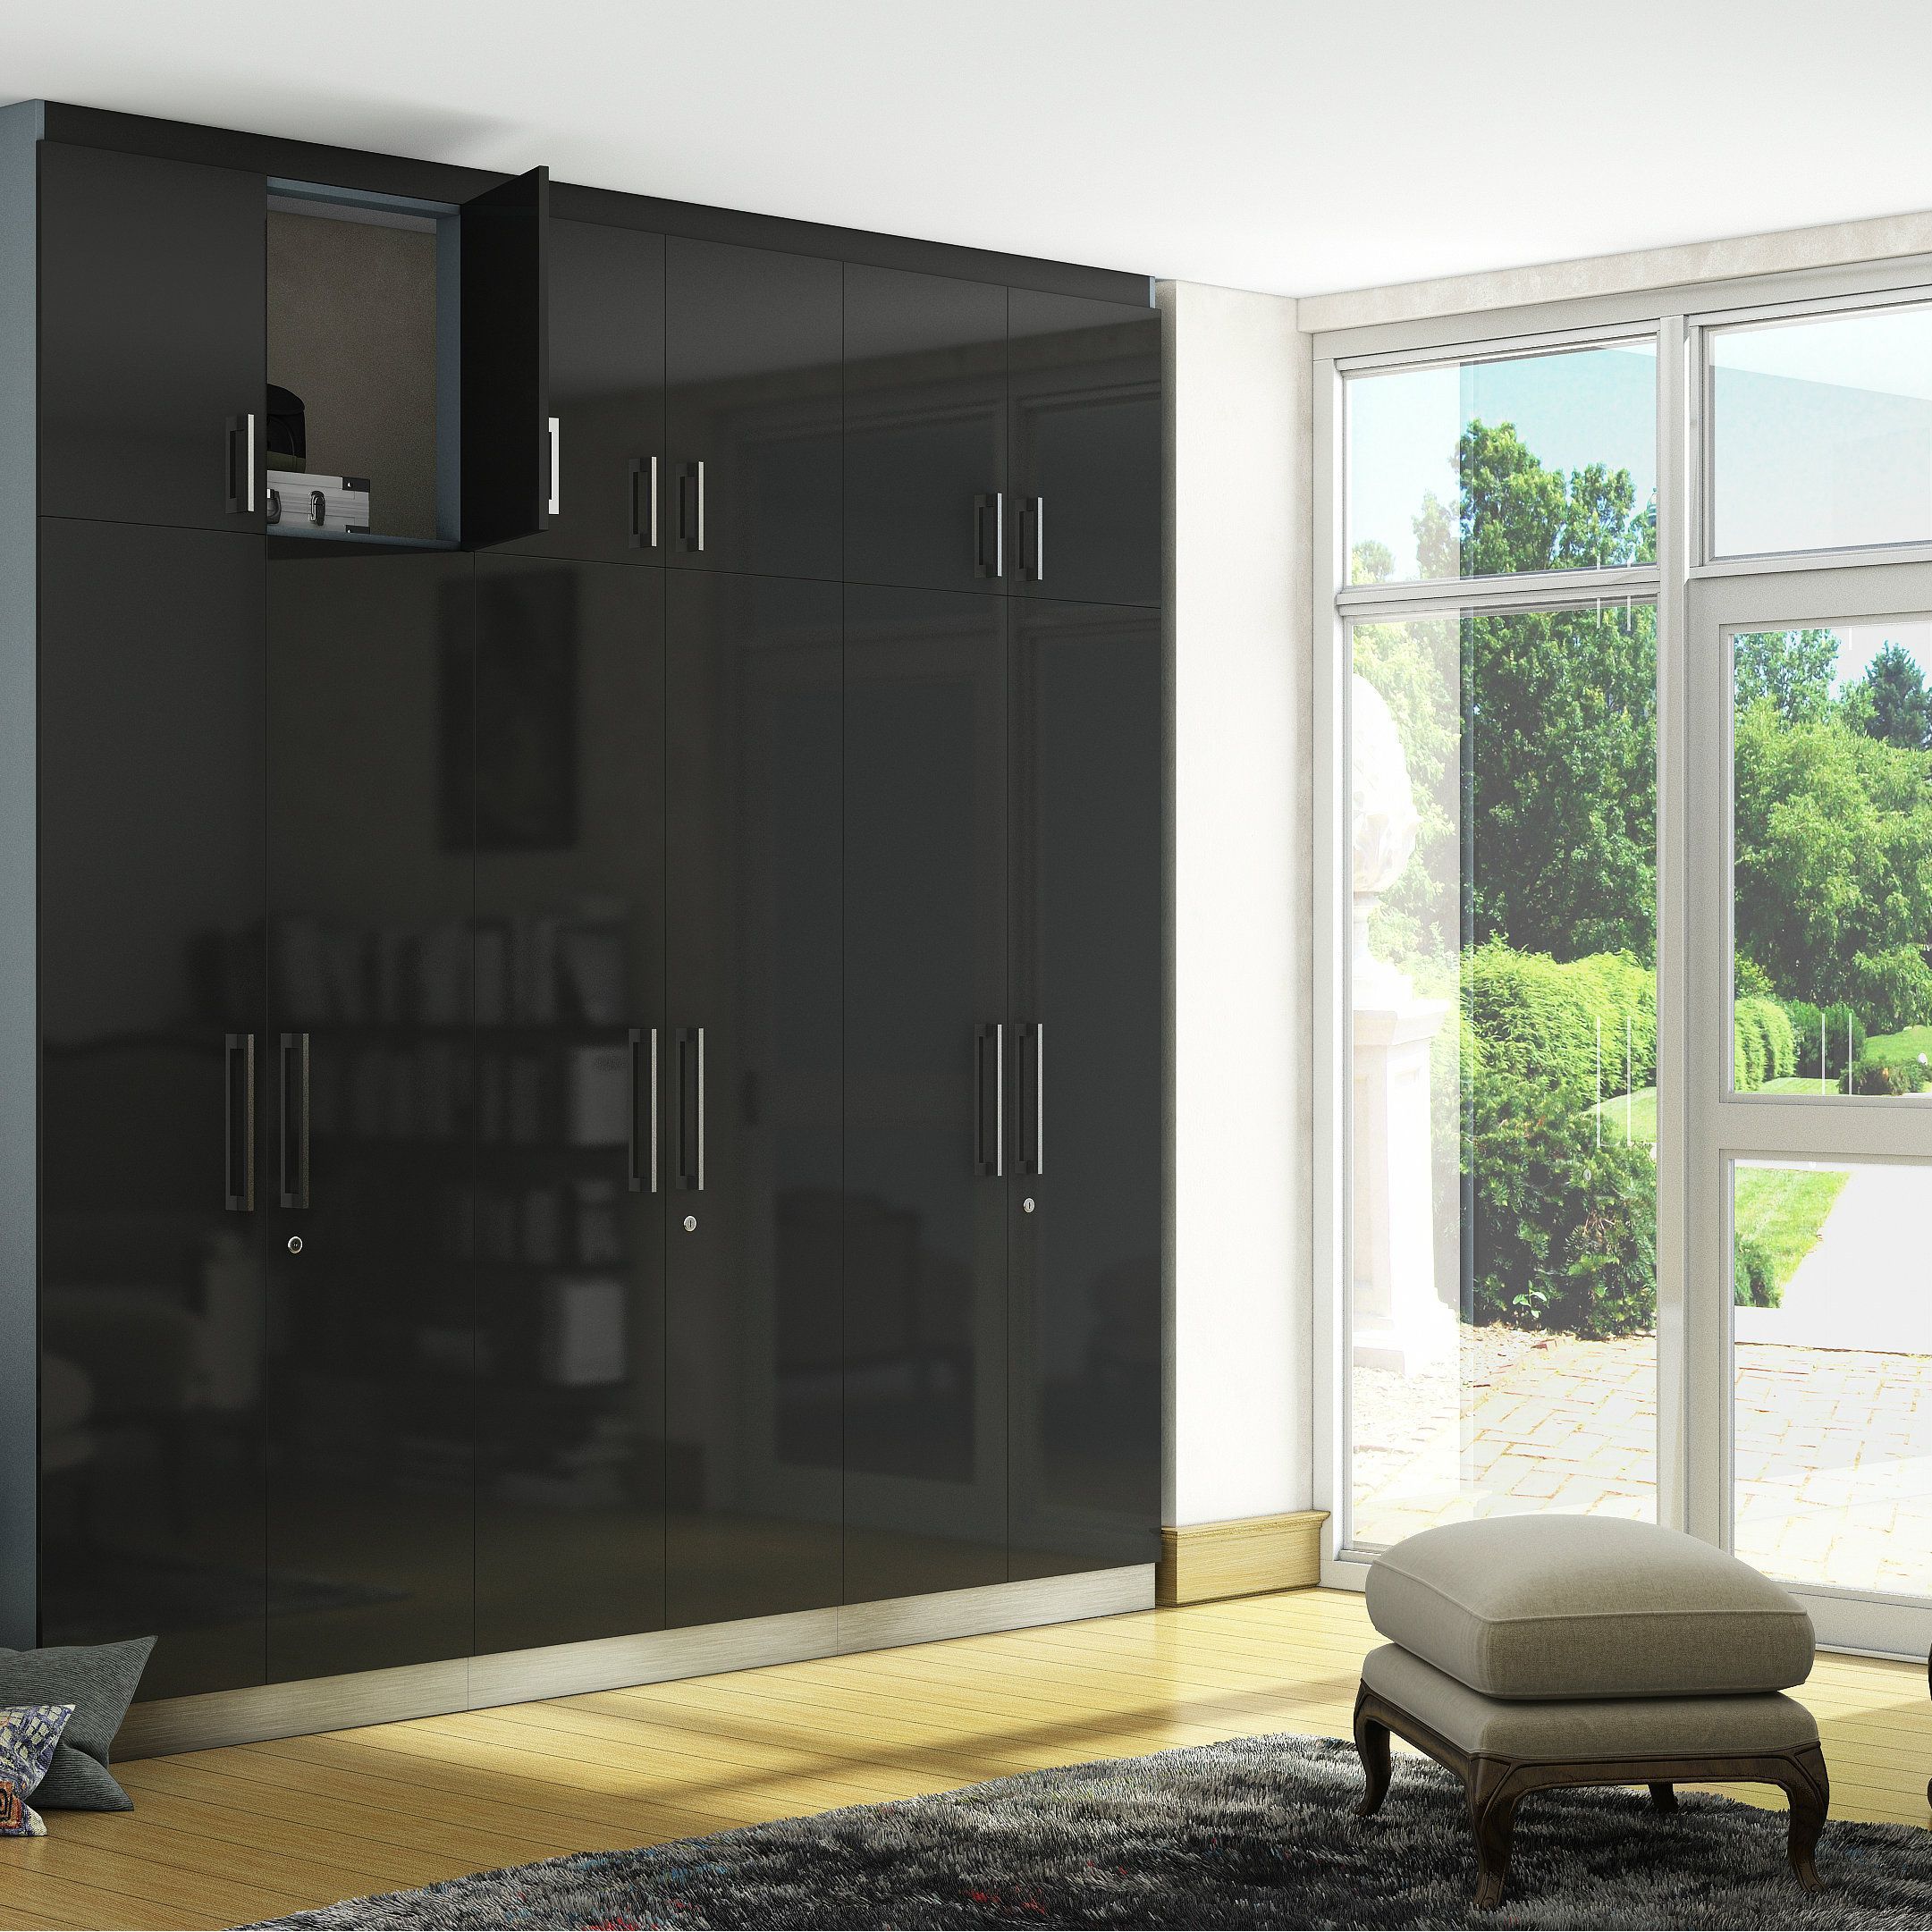 A Glossy Black Wardrobe That Is Every Bit As Impressive And Functional |  Wardrobe Design, Furniture Design, Grey Wardrobe Inside Gloss Black Wardrobes (View 3 of 15)